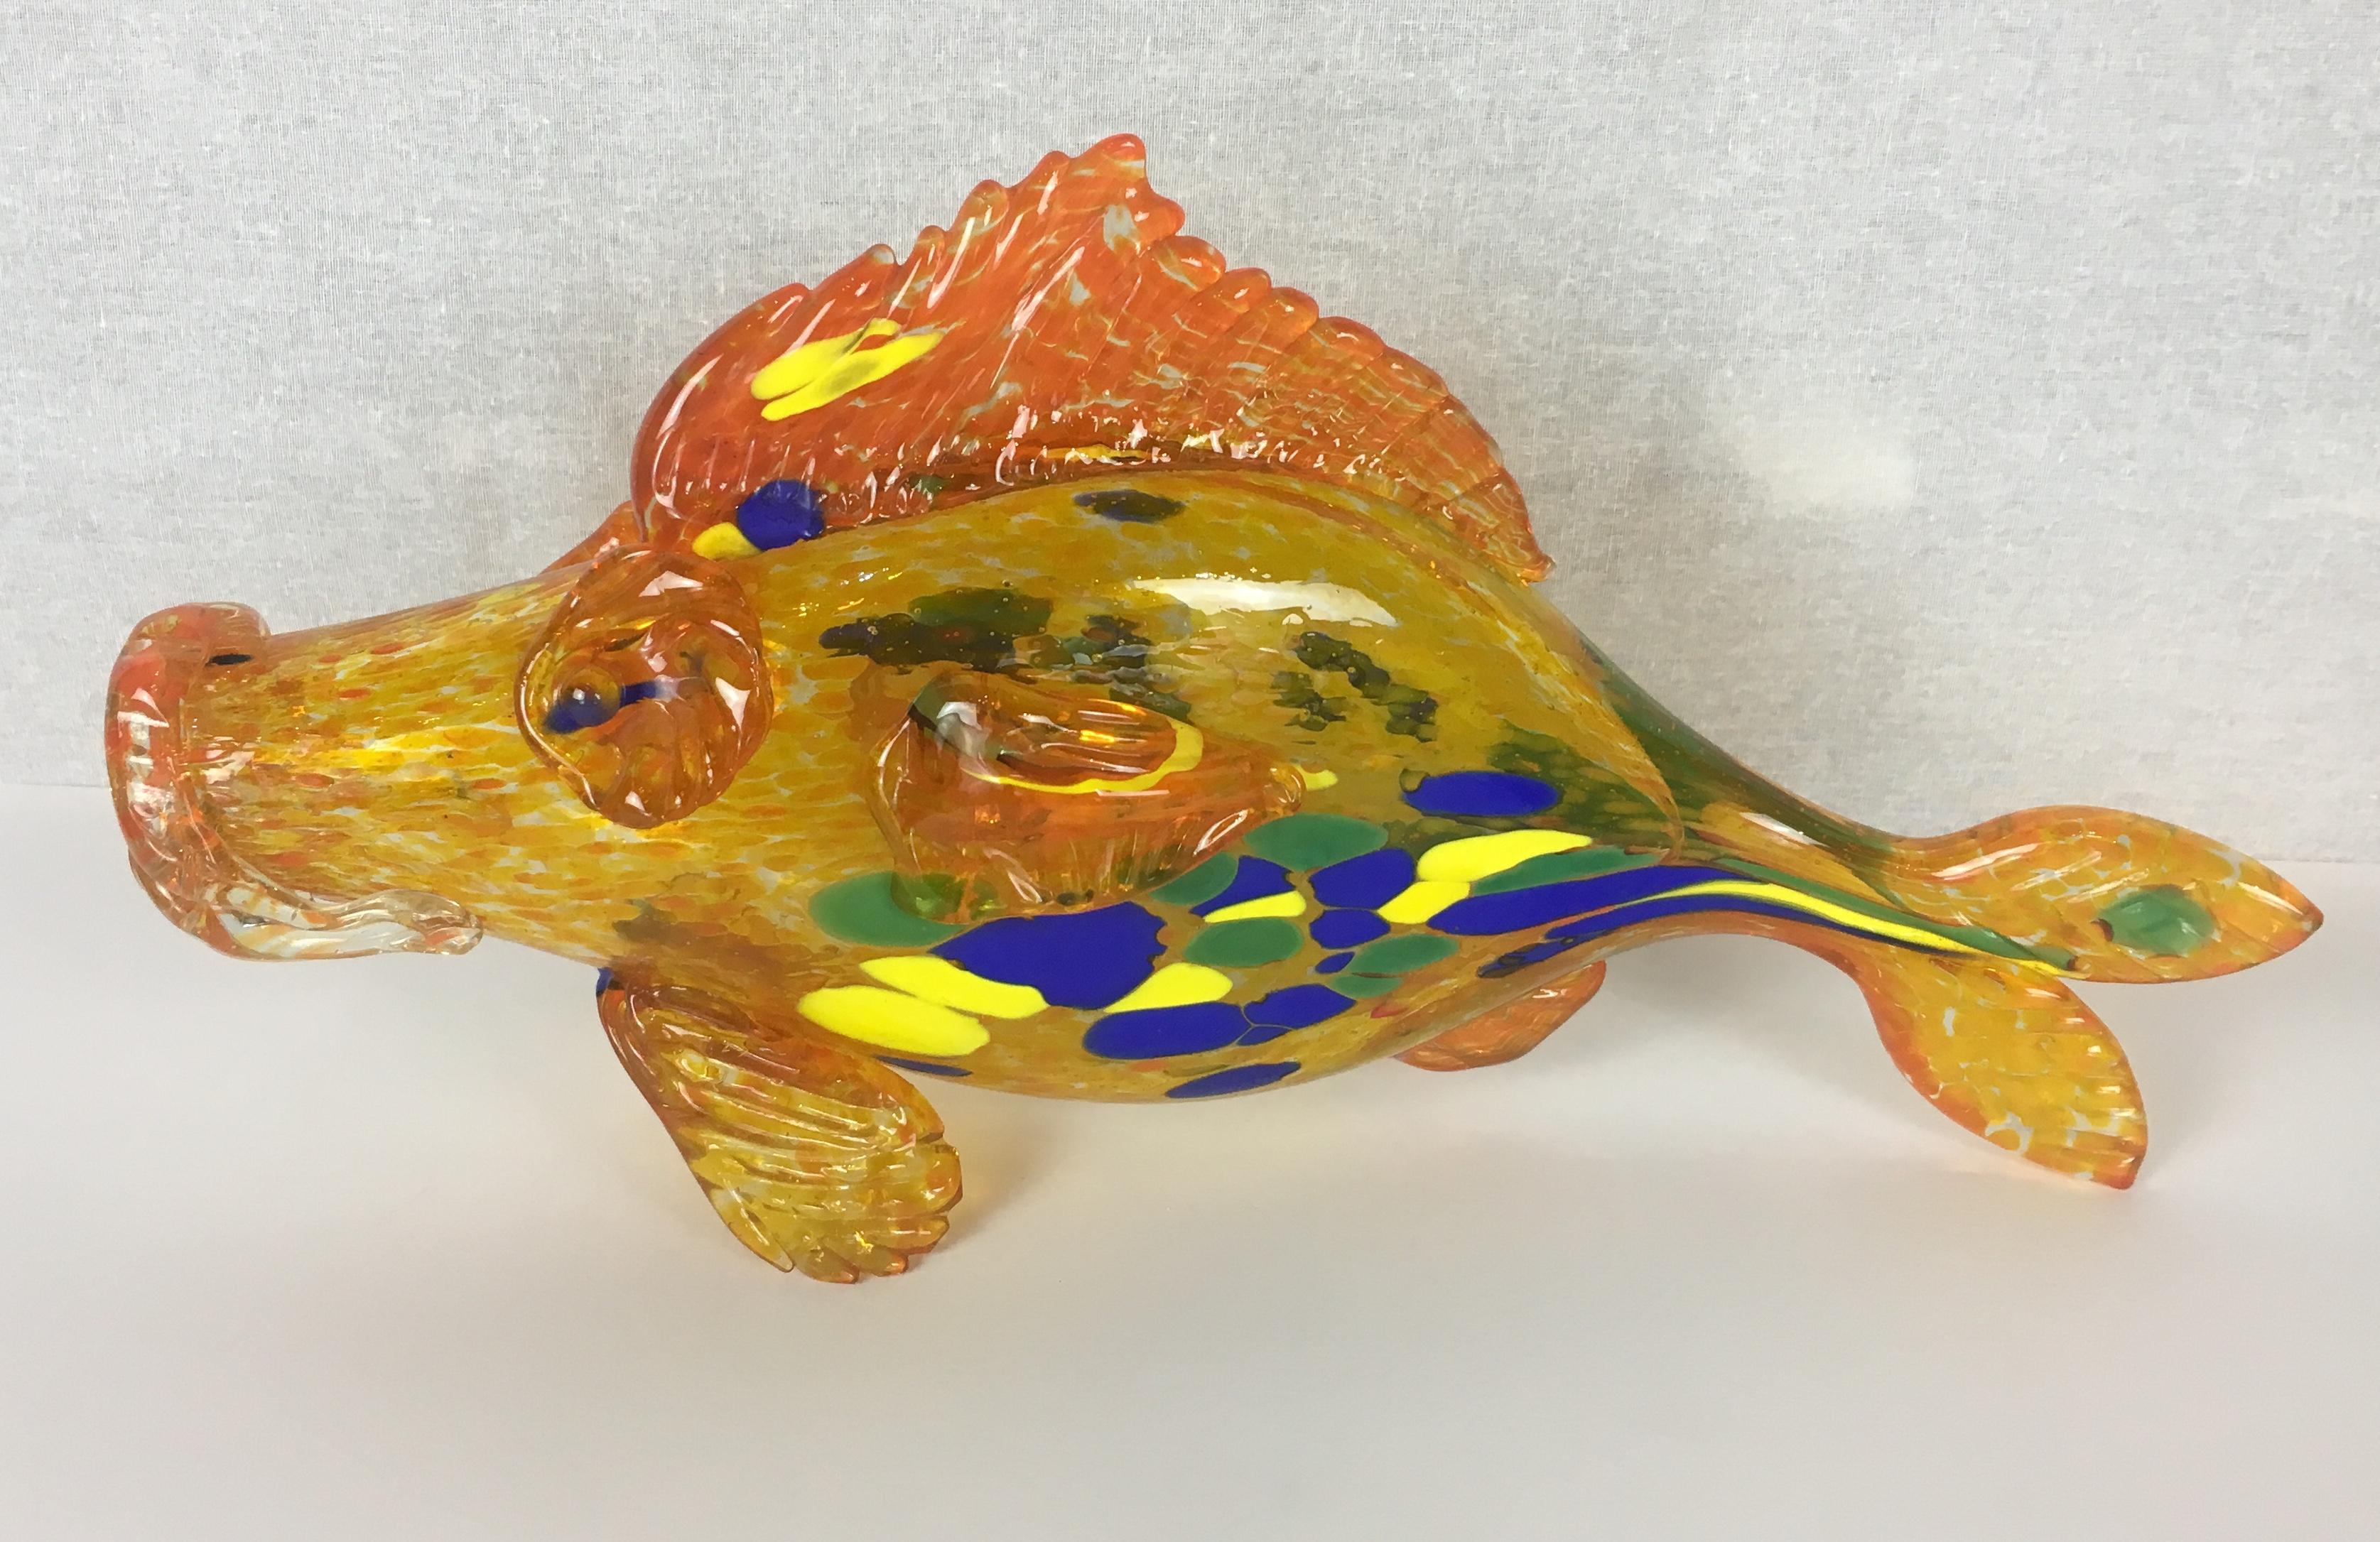 Beautiful hand blown yellow, blue, orange and green Murano art glass sculpture with flecks.  This Murano glass fish is from Italy, circa 1950s.

Very decorative, stunning colors when the light shines on it.
Will enhance any shelf, table or